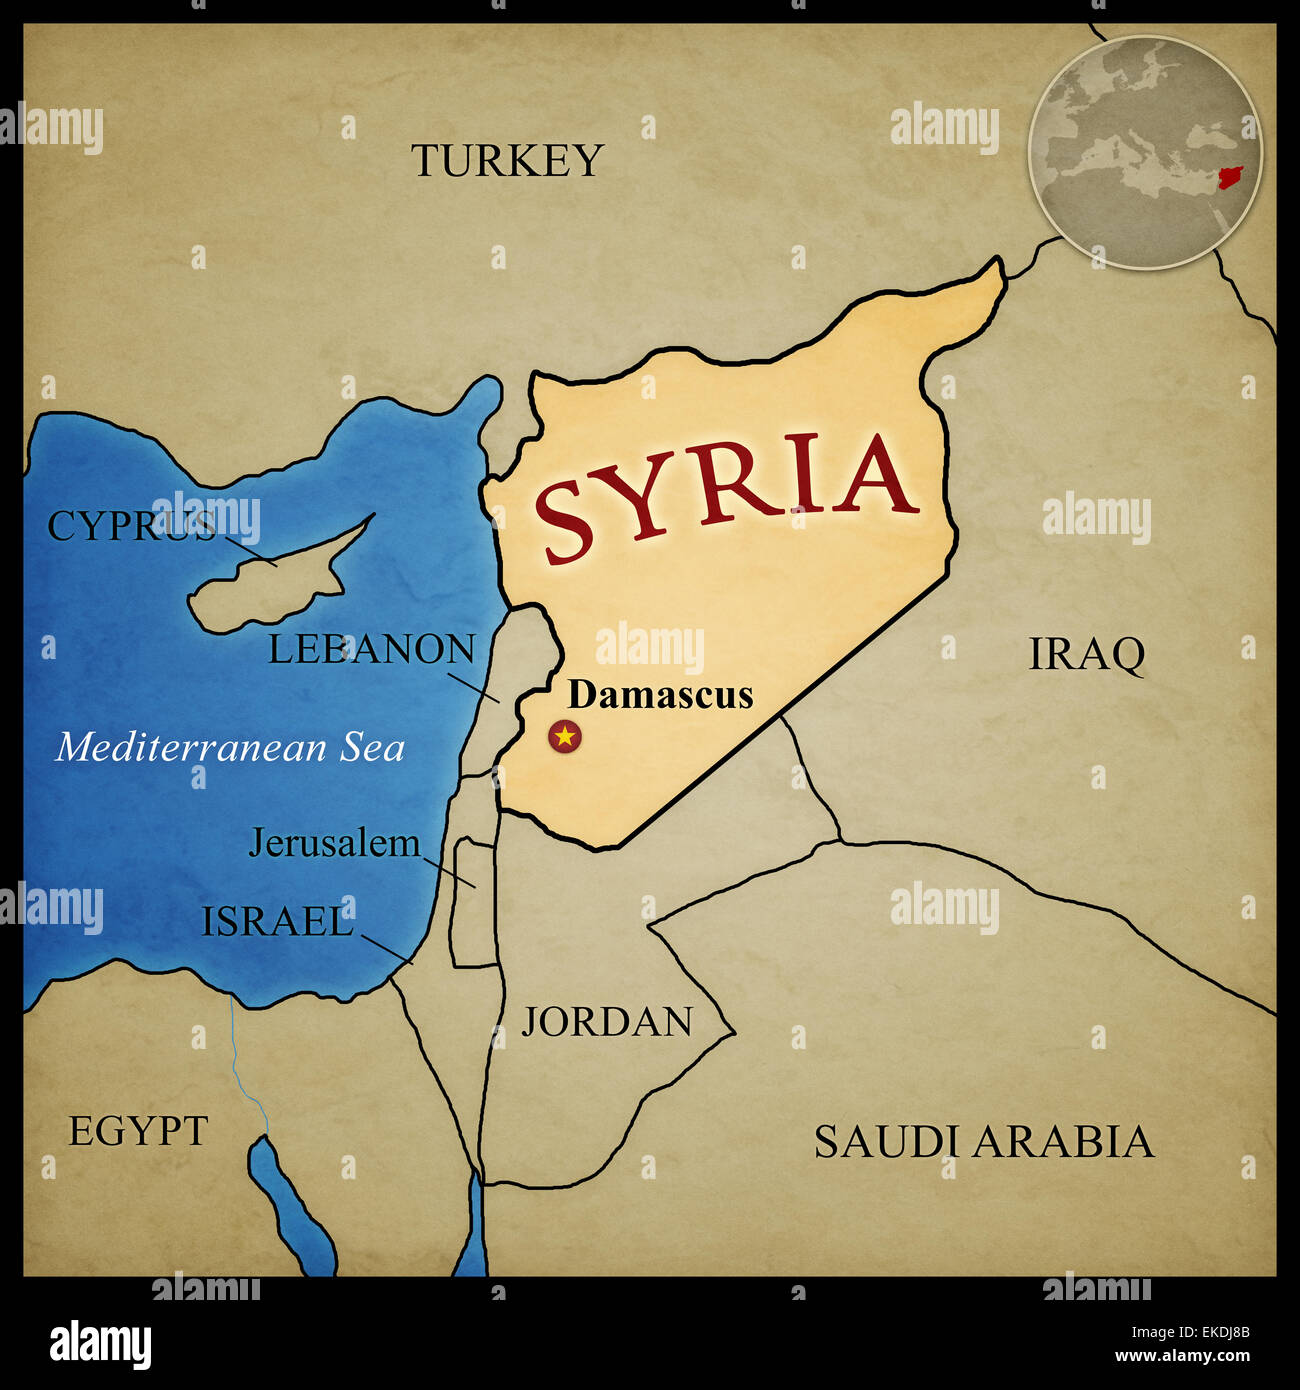 Syria map and bordering countries with capital Damascus marked. With location in the middle east. Stock Photo